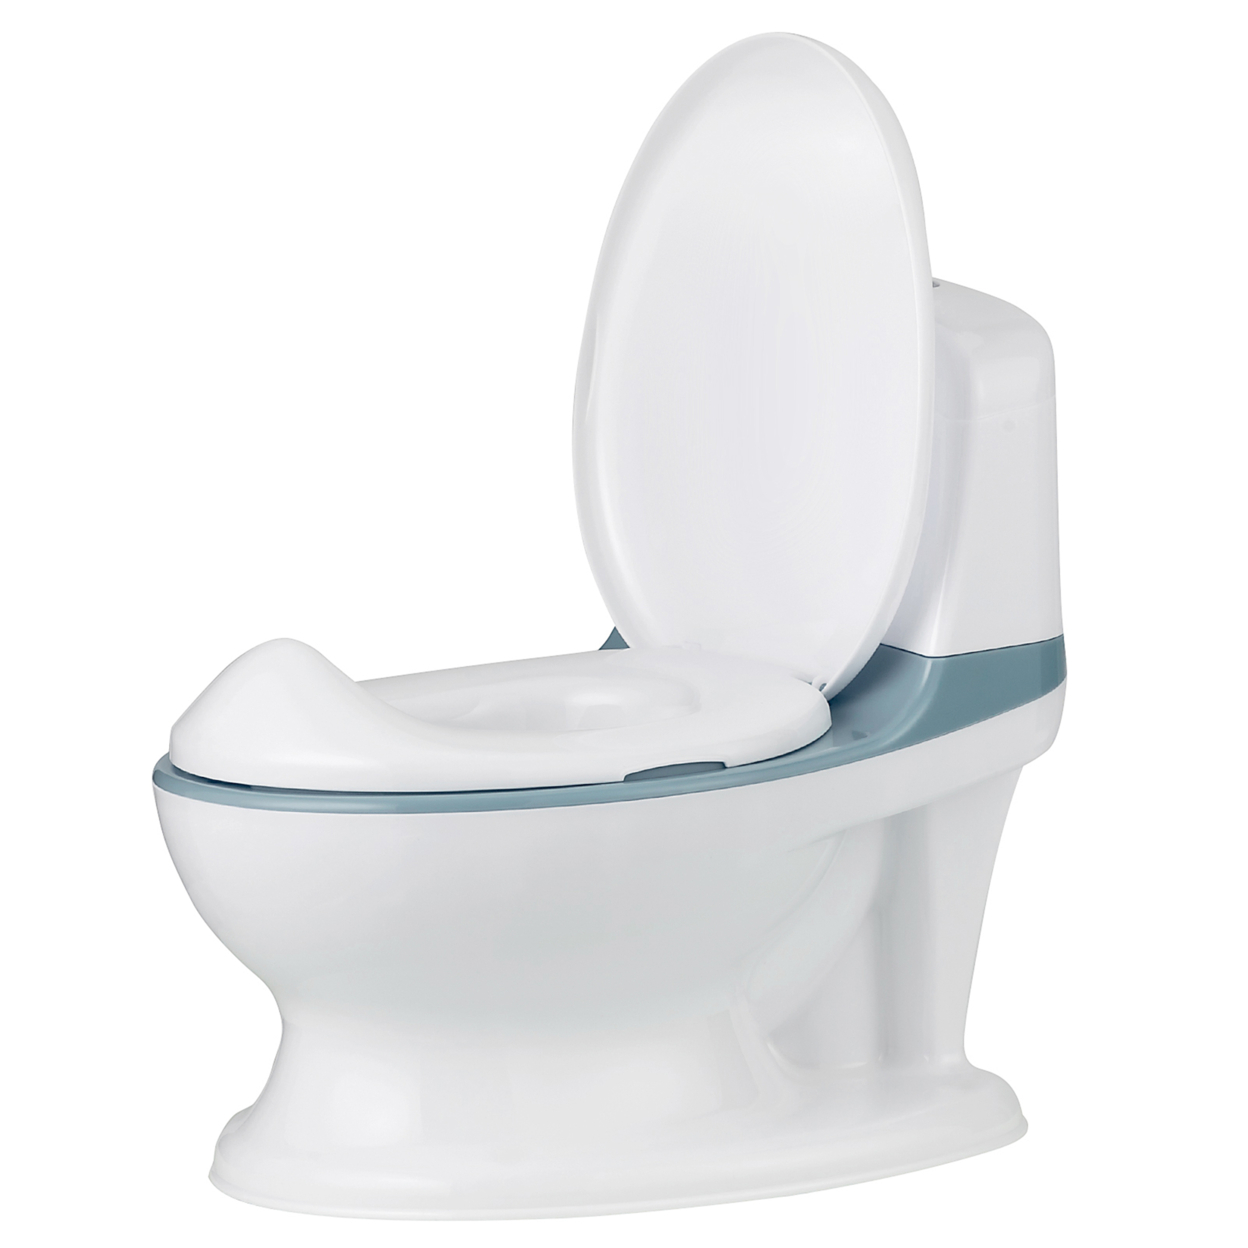 Realistic Potty Training Toilet Kids Toddlers W/ Flush Sound Blue/Gray/Pink - Blue